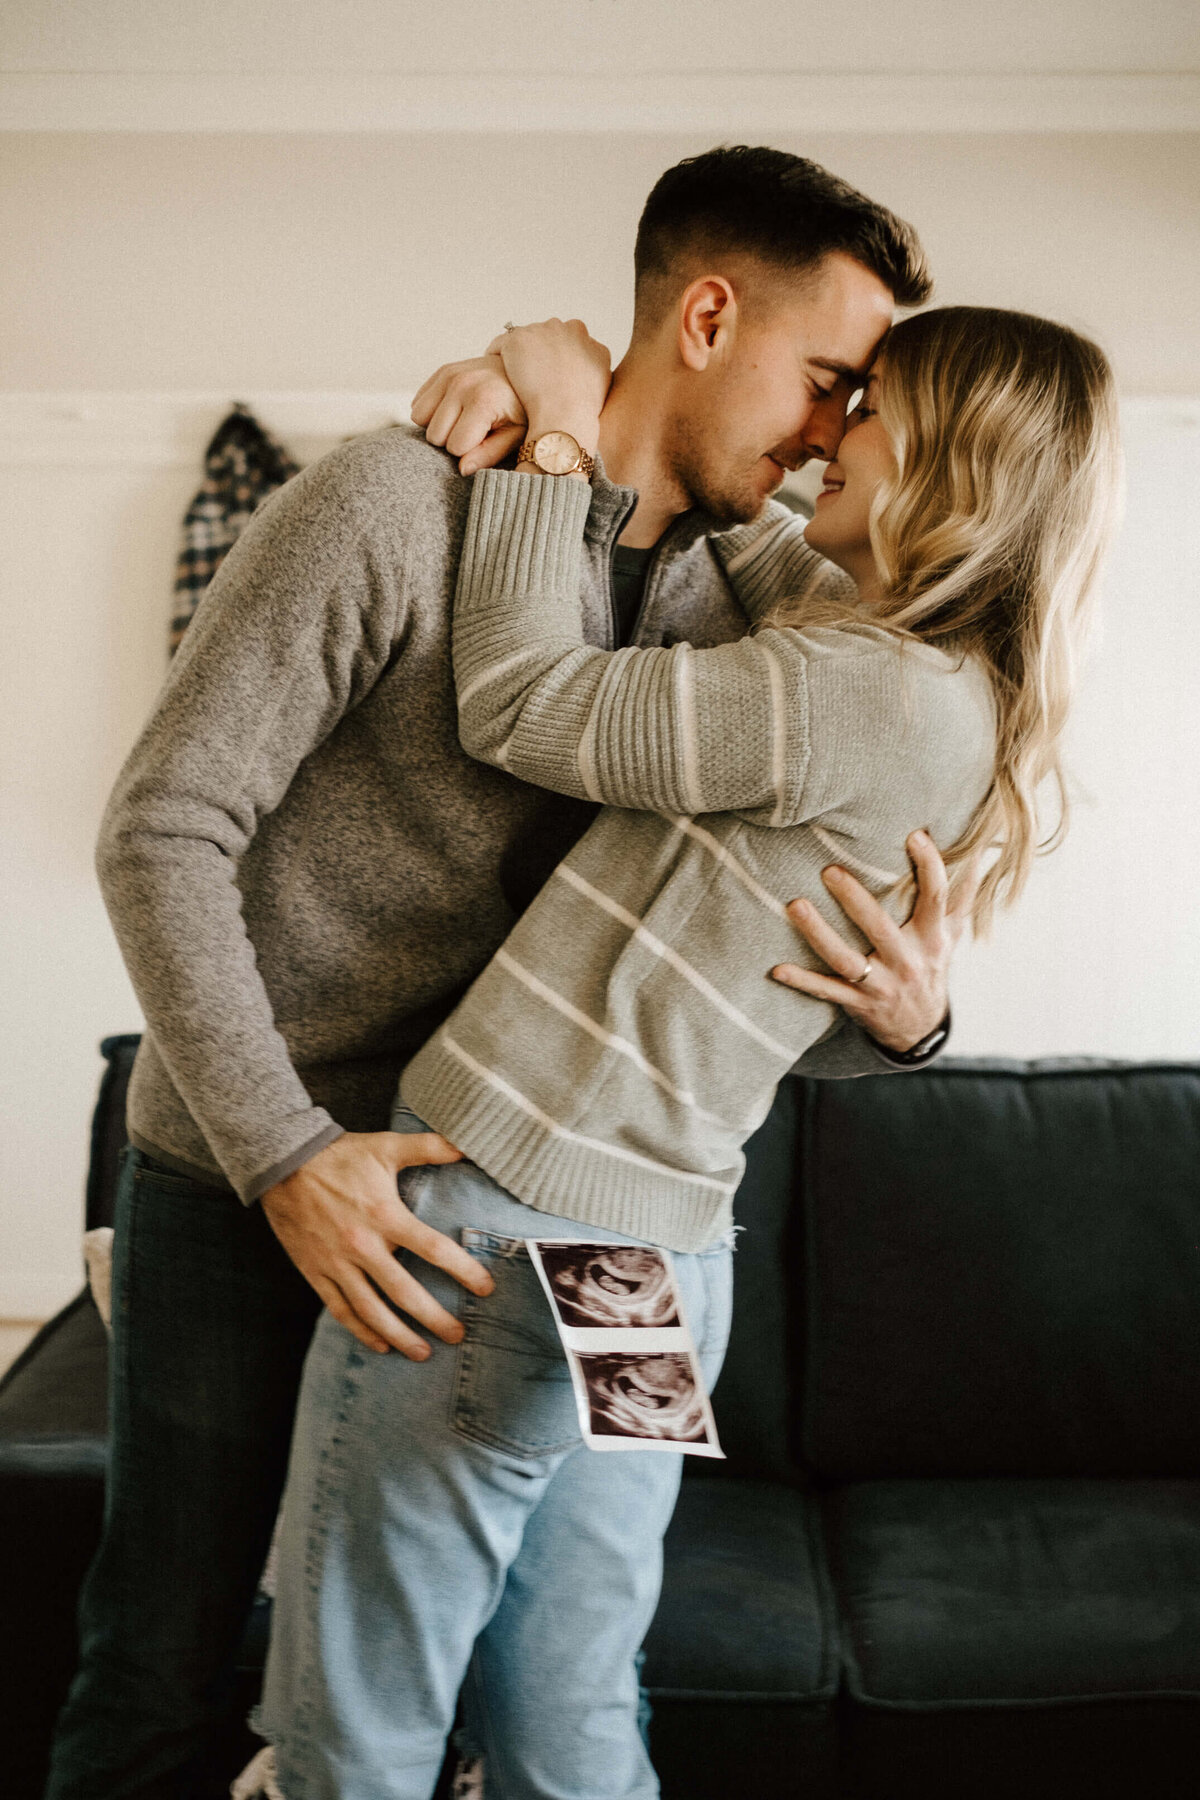 Intimate Home Gender Reveal Couple Photoshoot - Stacey Vandas Photography69